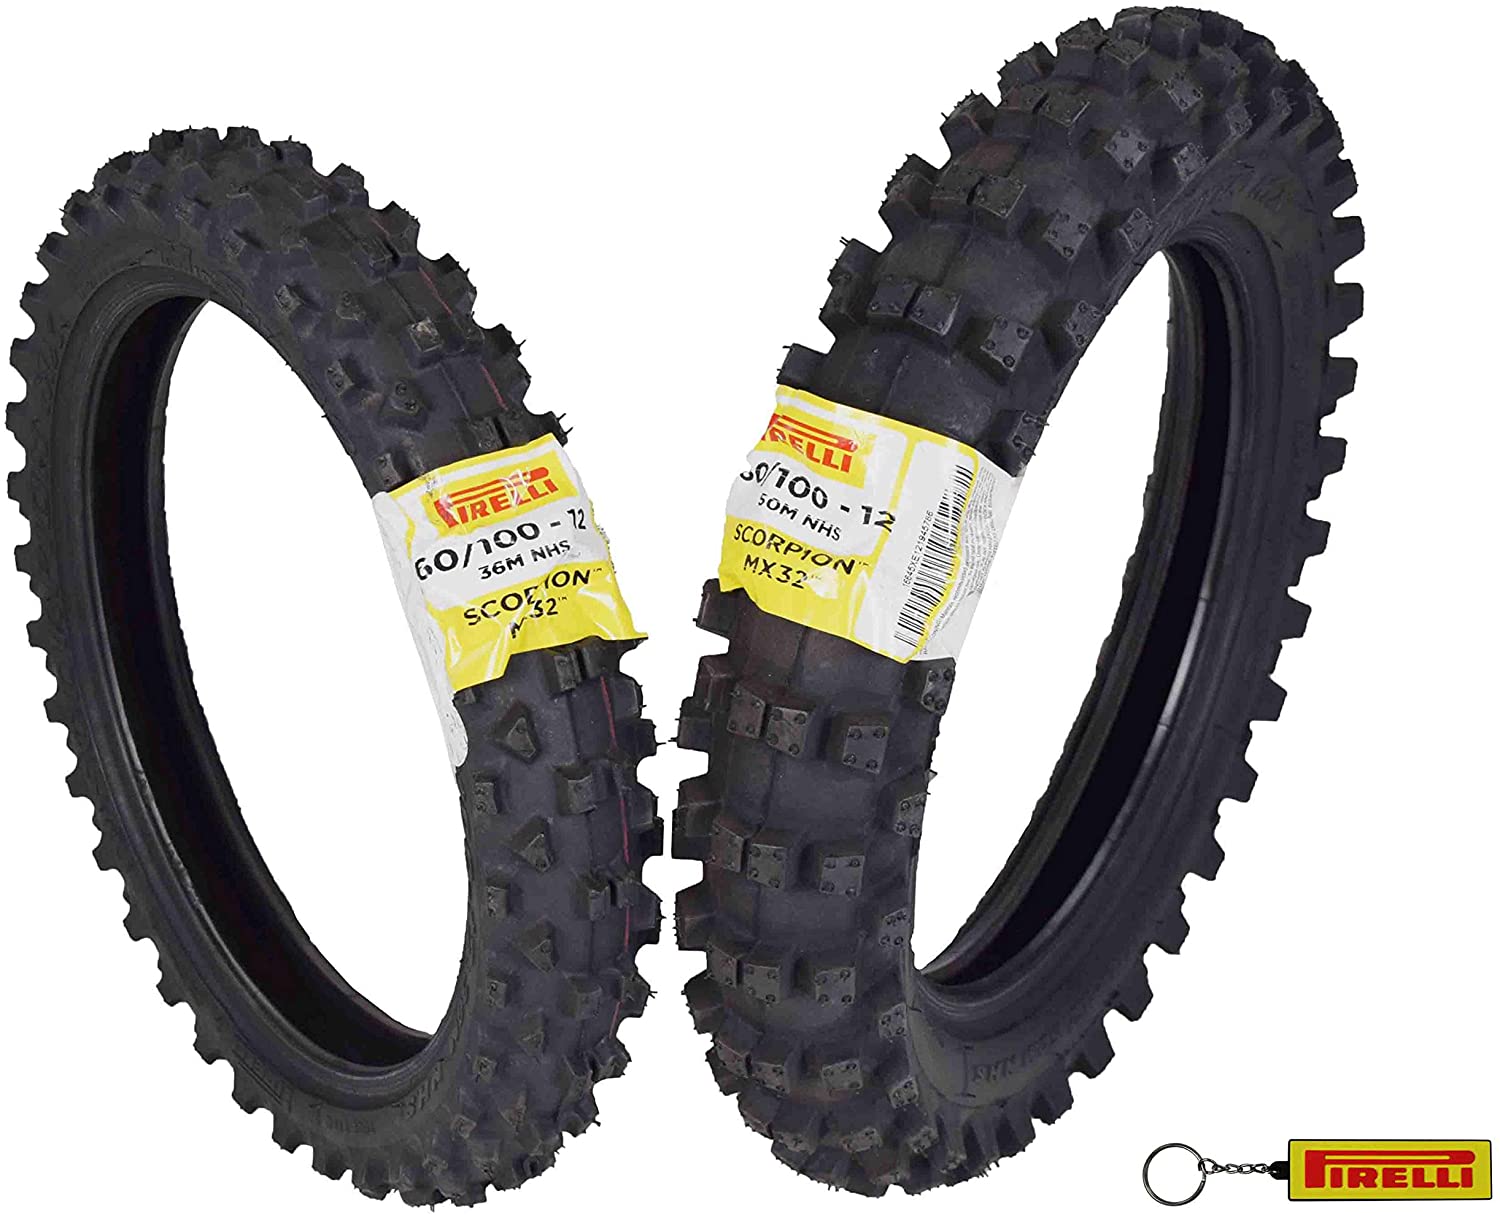 Best Off-Road Motorcycle Tires - Our Top 3 - Auto by Mars